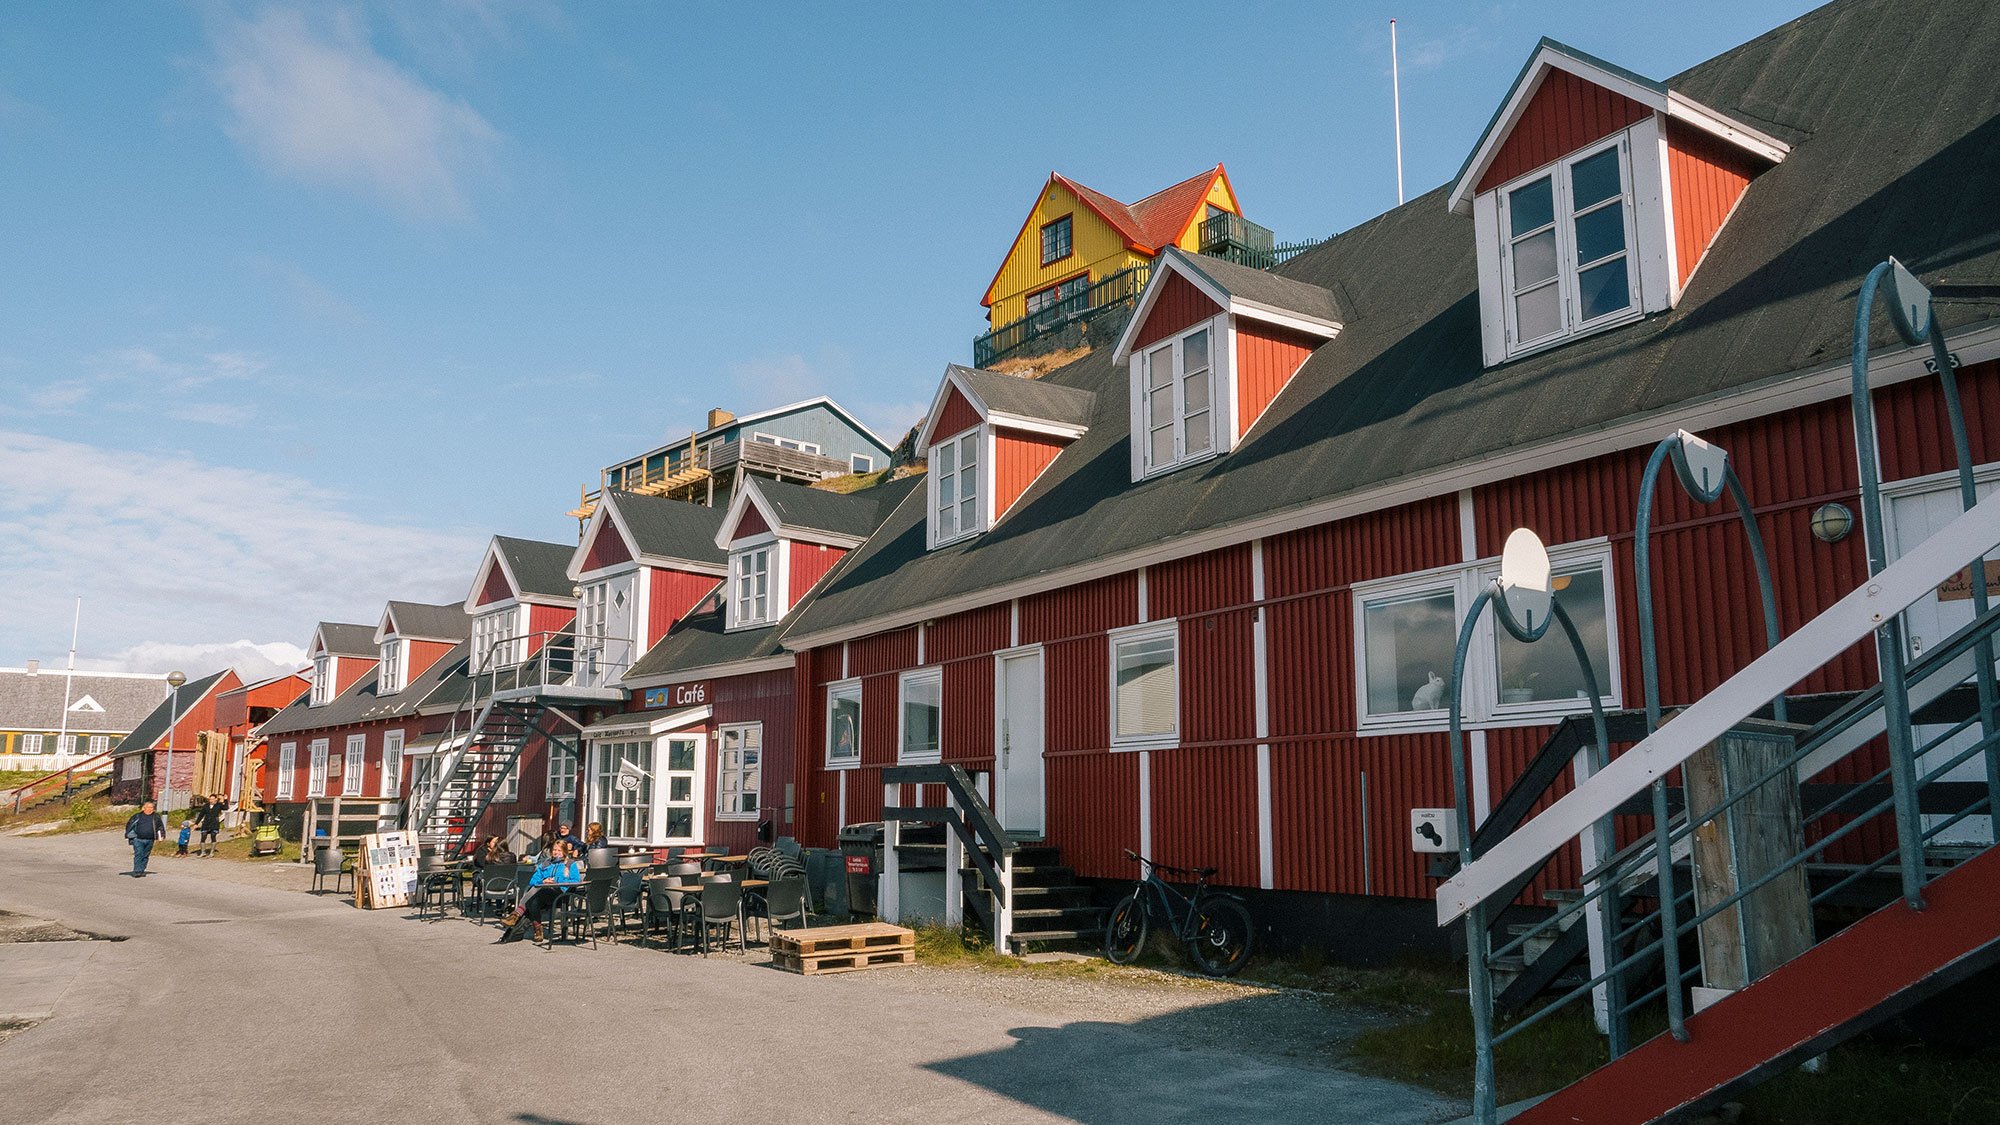 Brightly coloured houses are a signature characteristic of Nuuk.